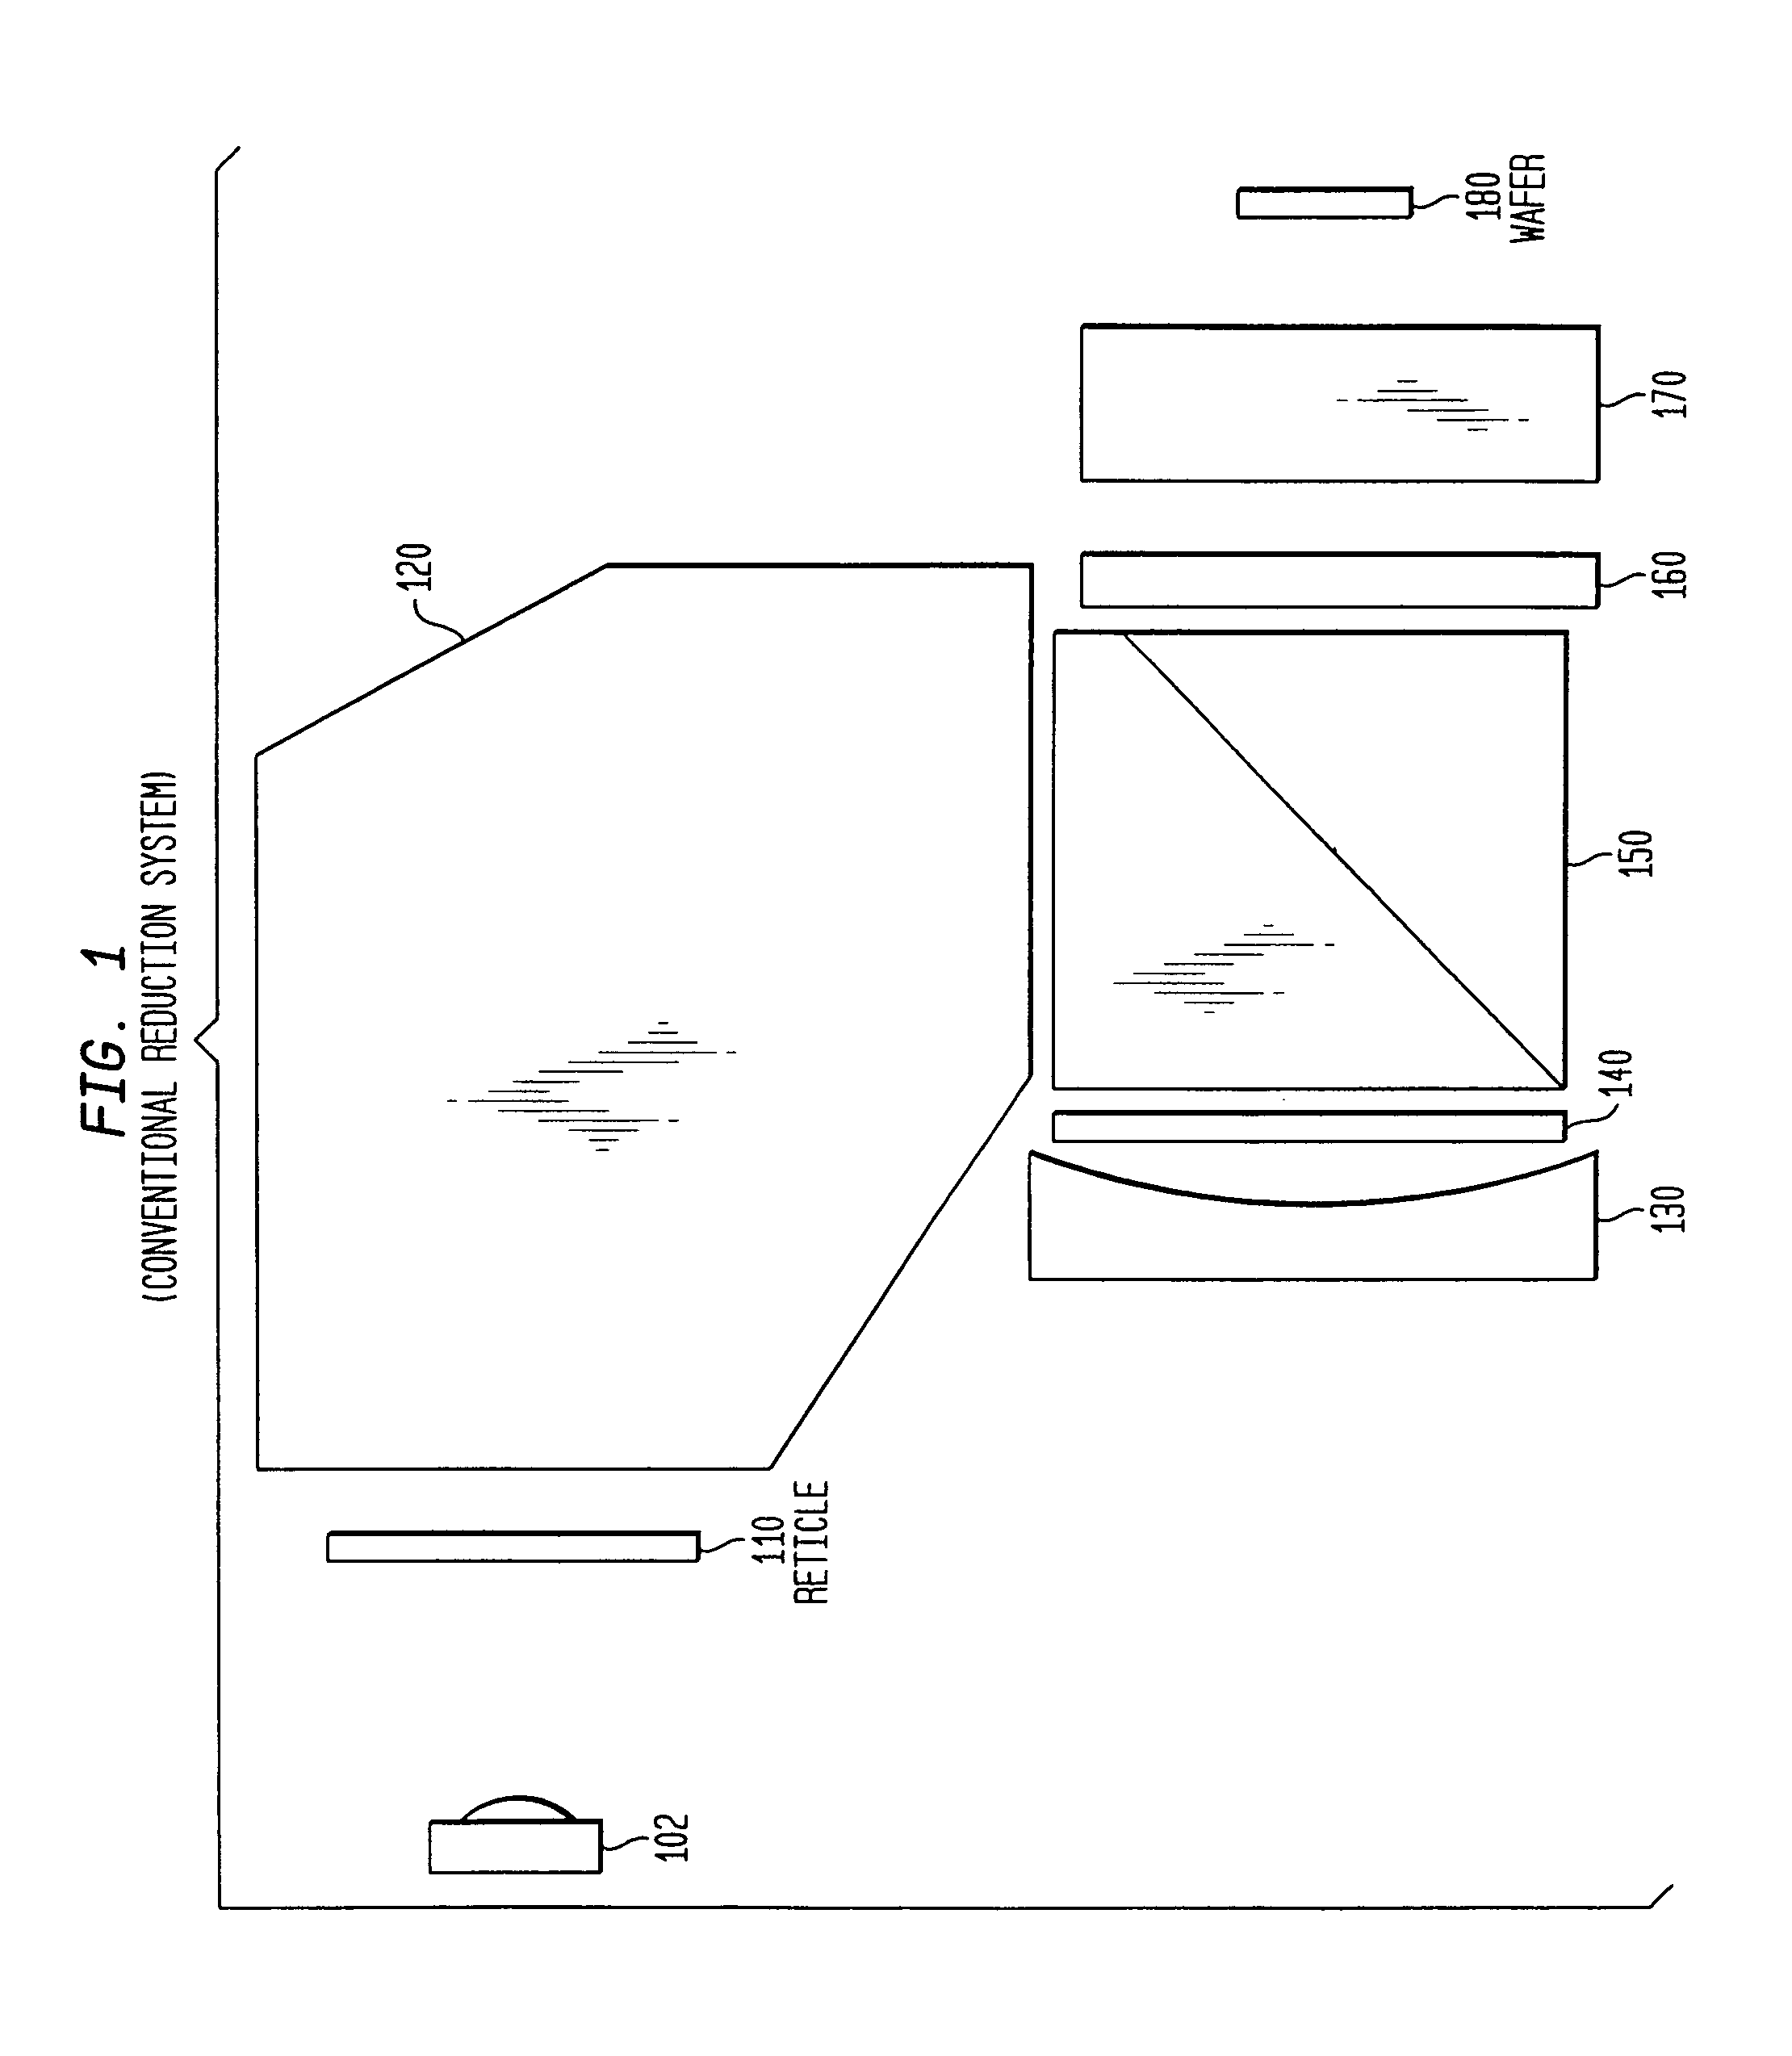 Optical reduction method with elimination of reticle diffraction induced bias